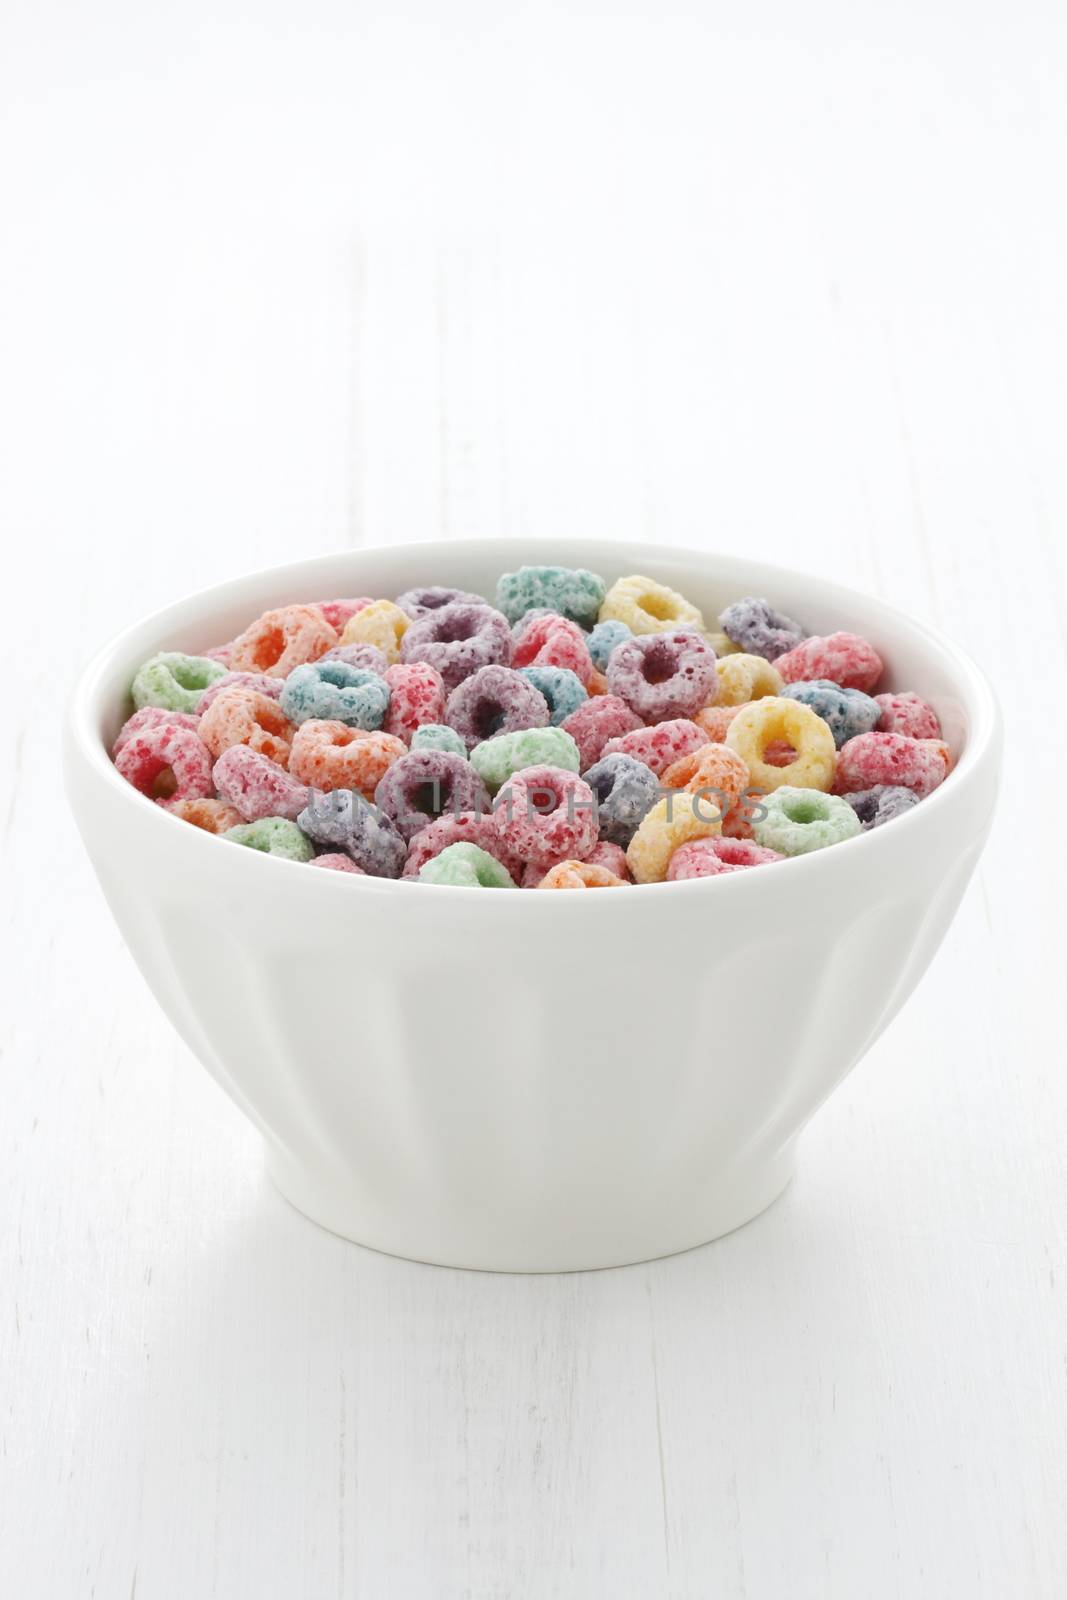 delicious and nutritious fruit cereal loops flavorful, healthy and funny addition to kids breakfast 